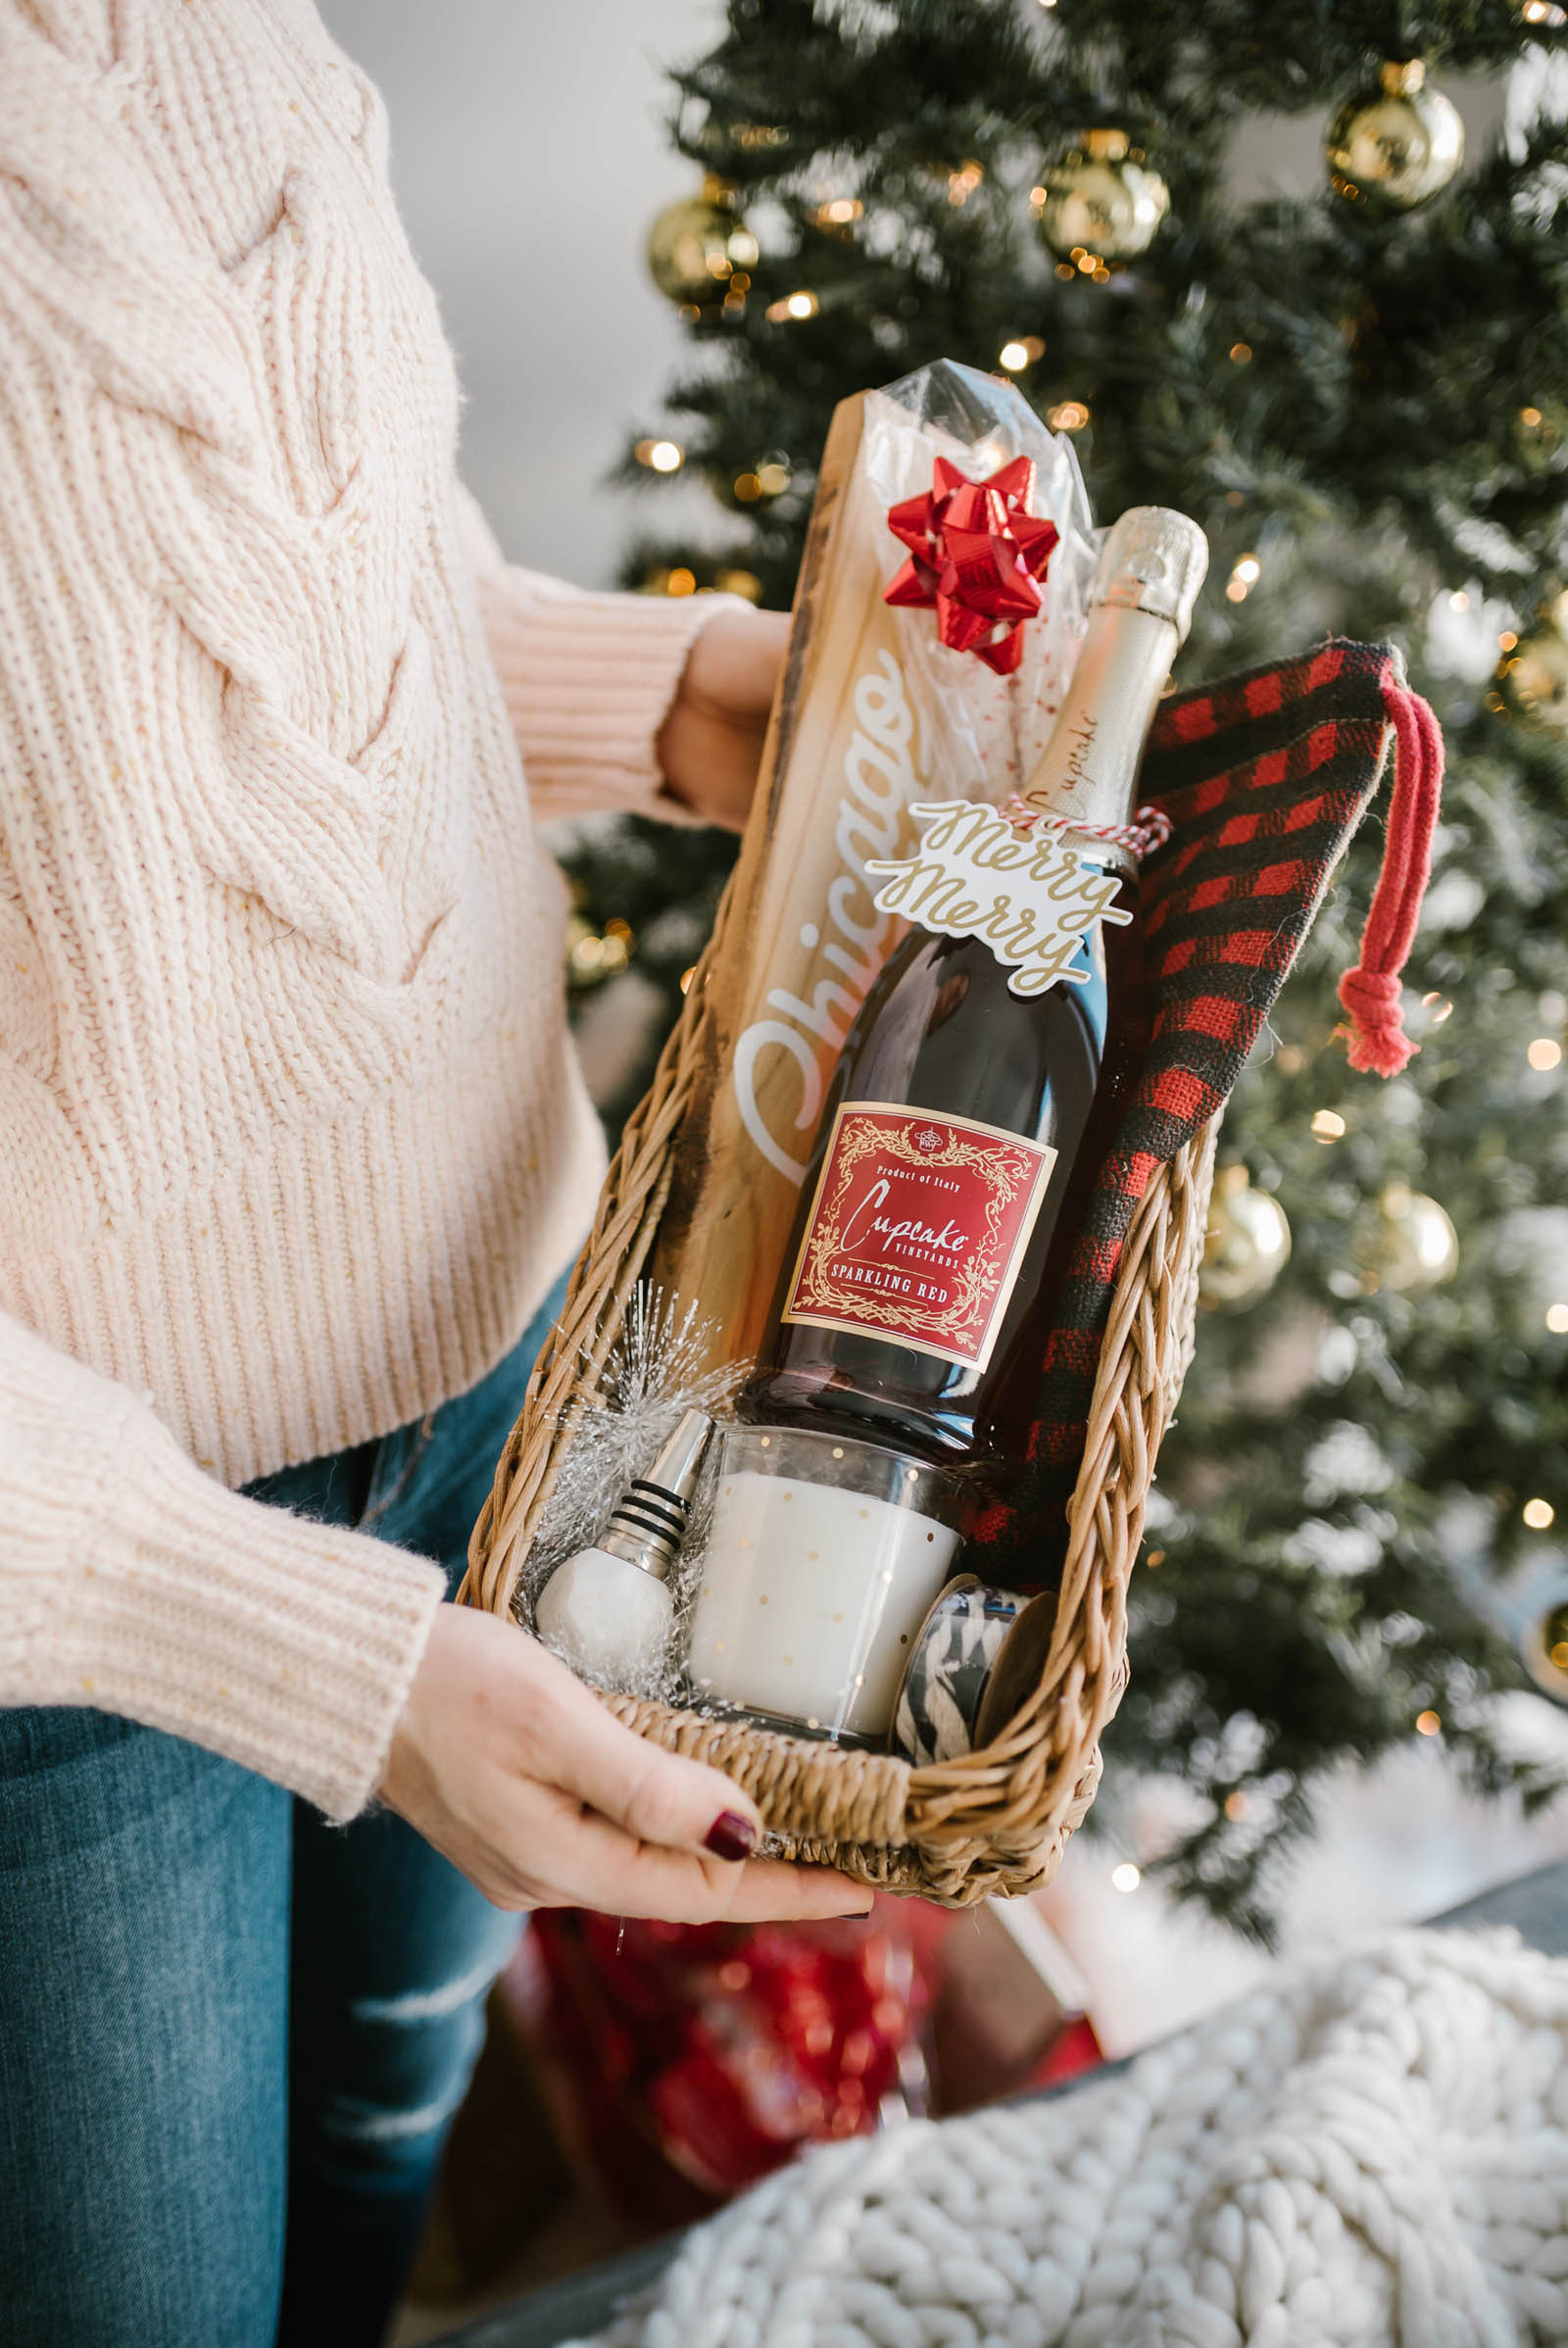 Wine Gift Basket Ideas To Make
 Last Minute Holiday Idea Easy Homemade Gift Baskets